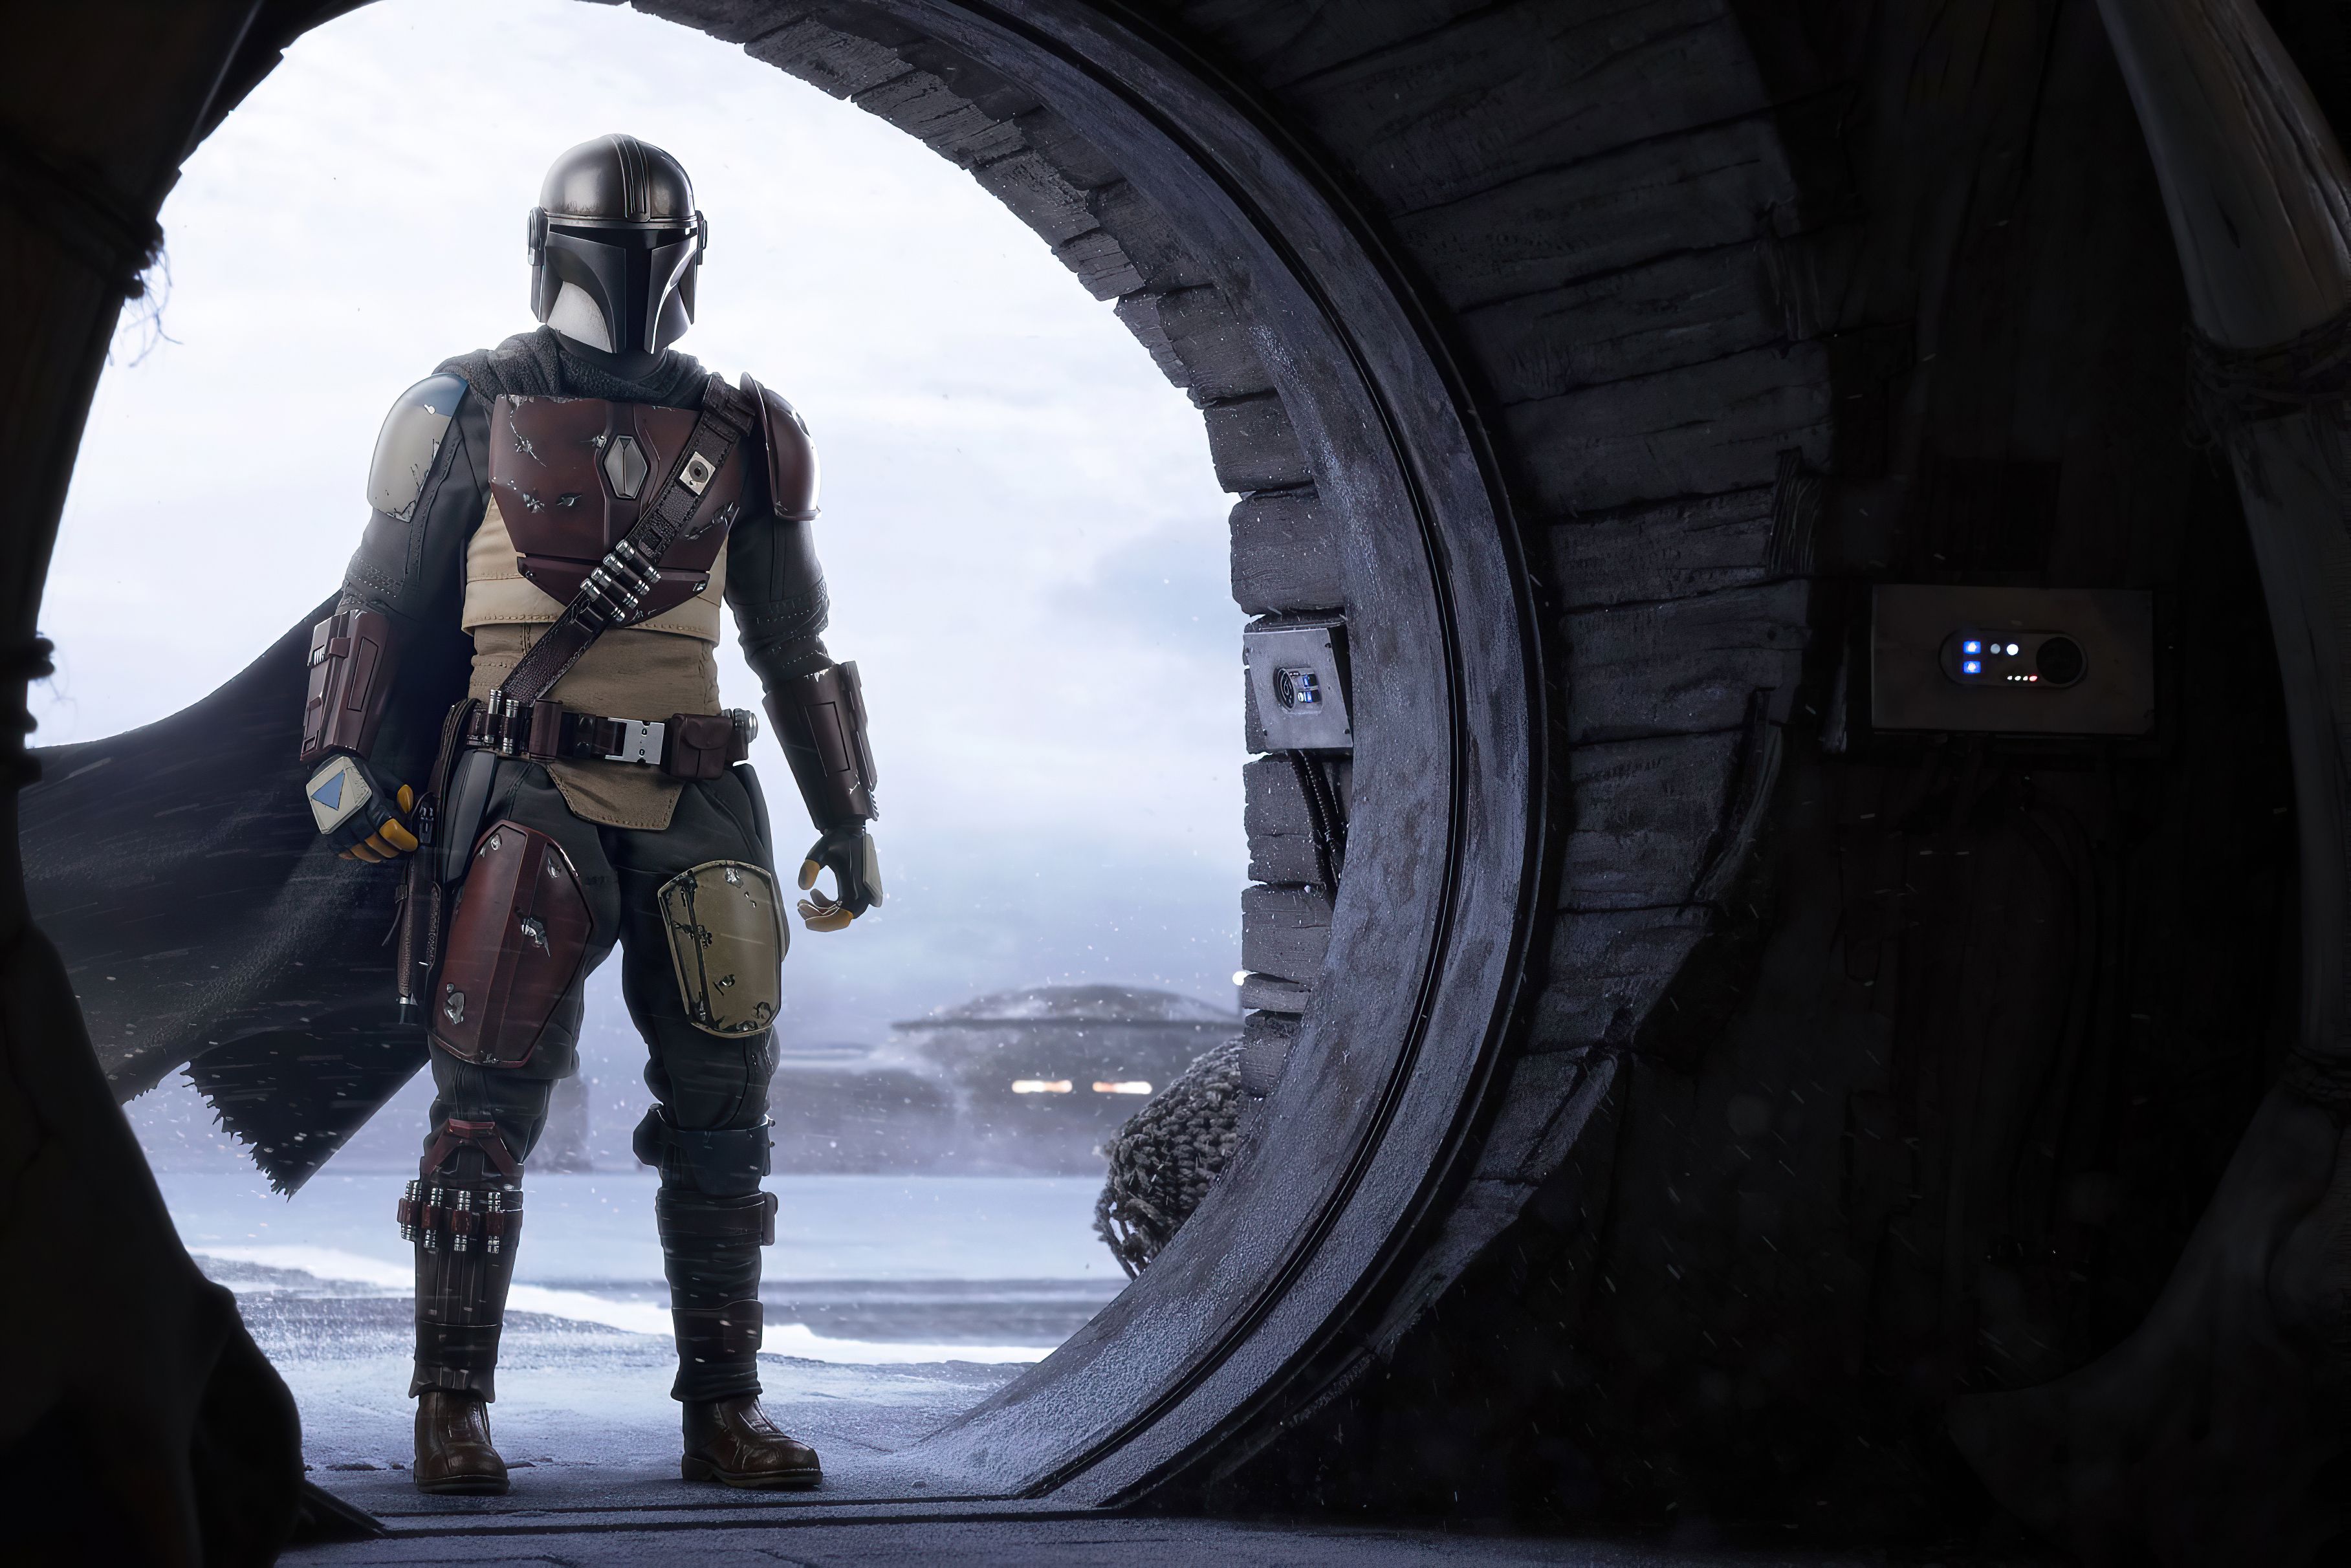 Pedro Pascal The Mandalorian 2 Wallpaper, HD TV Series 4K Wallpapers, Image, Photos and Backgrounds